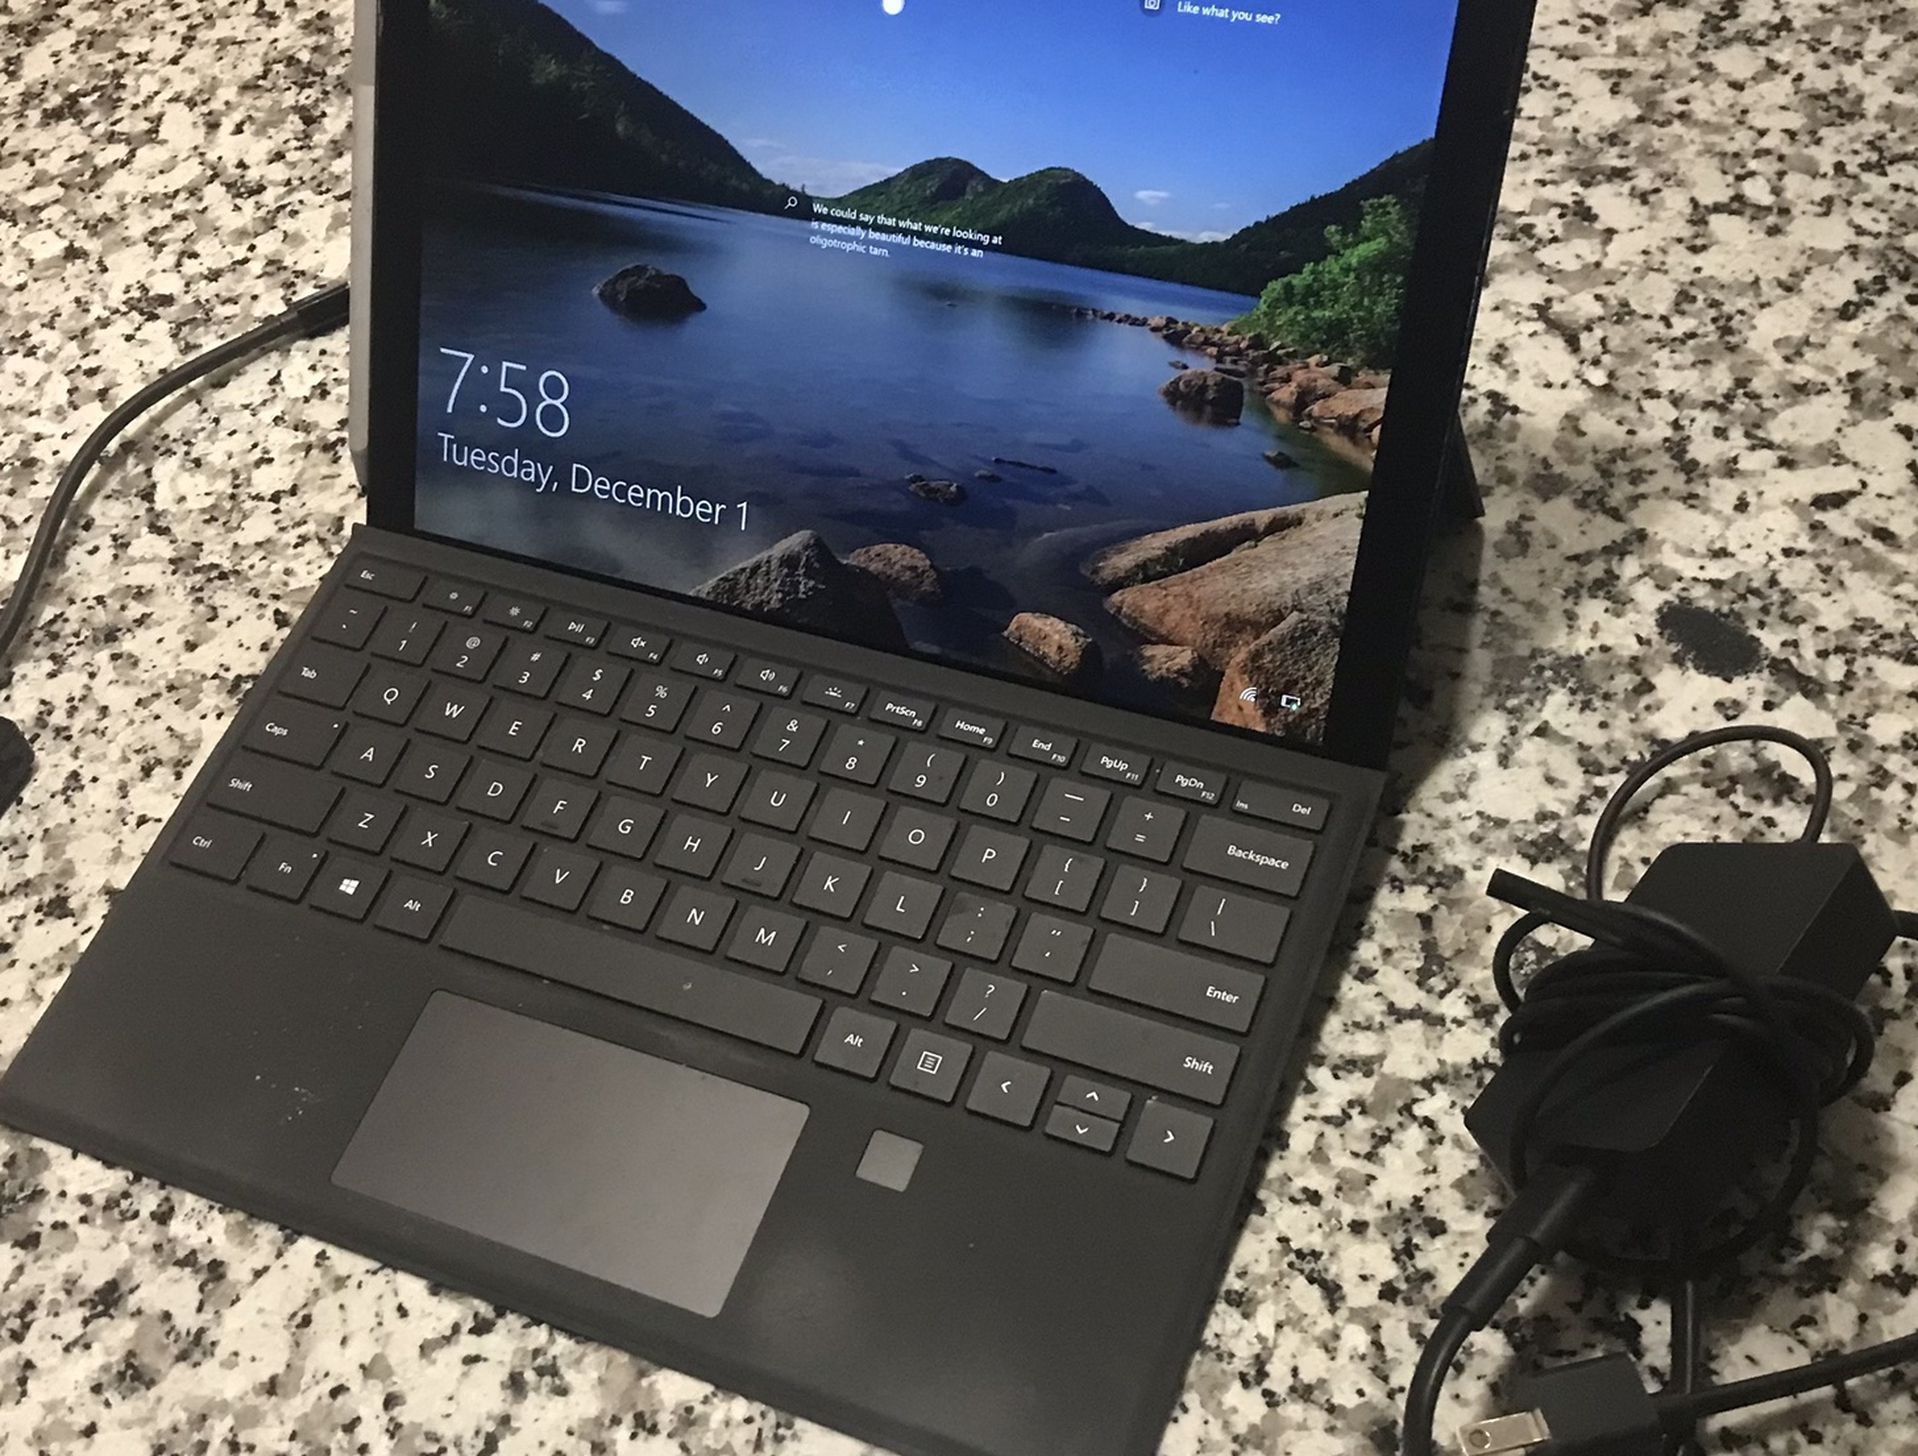 Surface Pro 6 with Keyboard, Stylus Pen, And HDMI Adapter